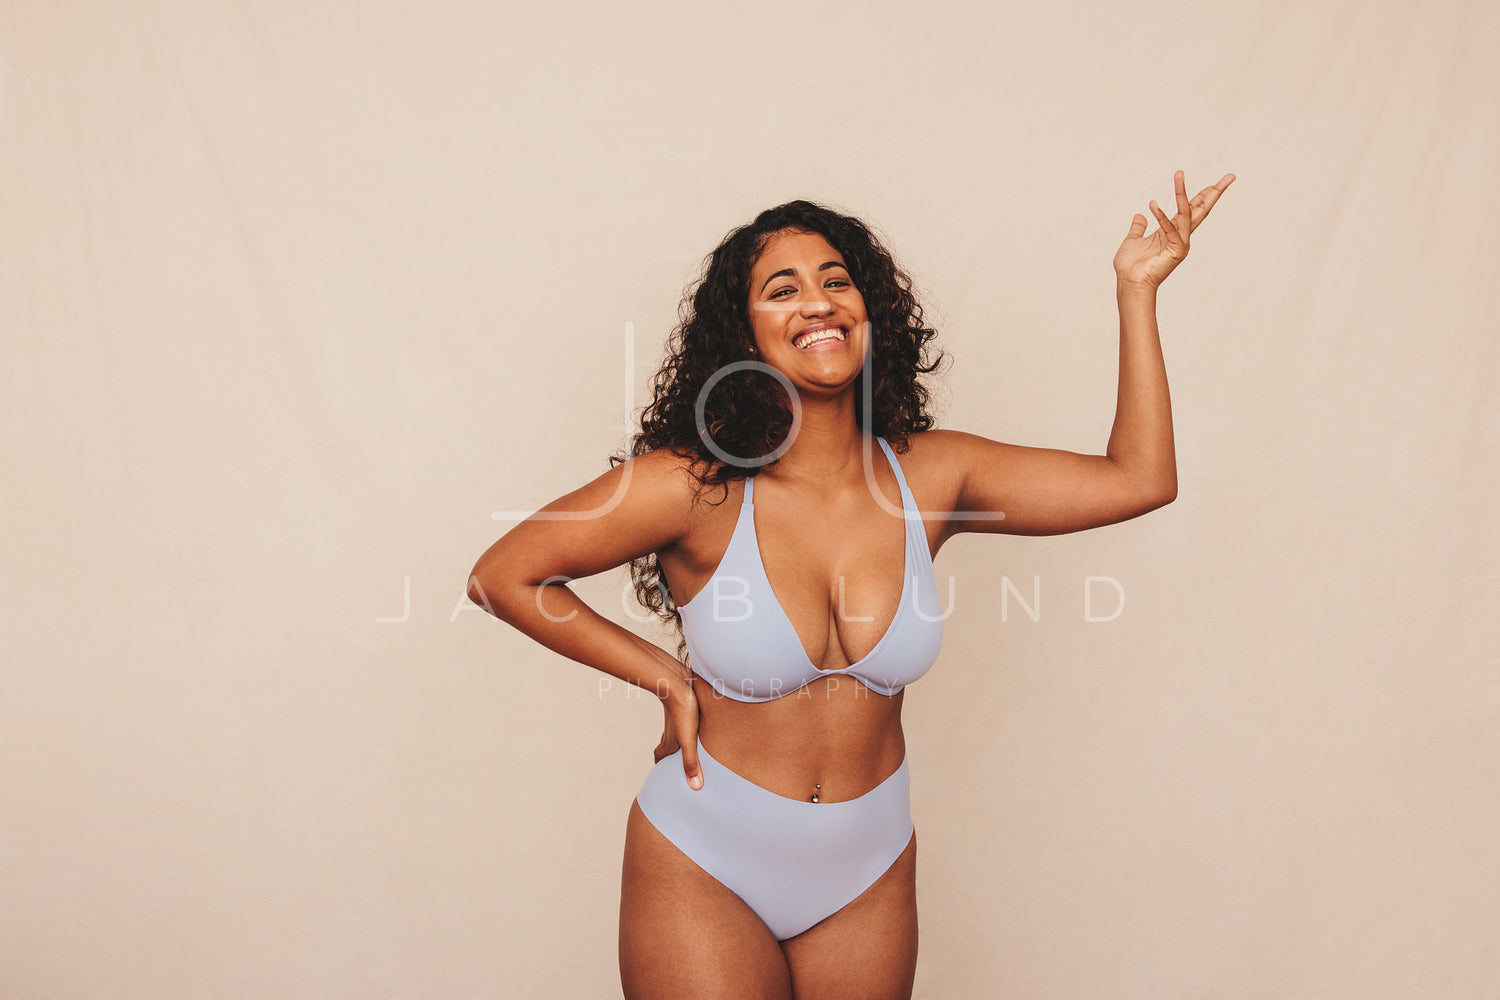 Beautiful plus size woman smiling happily in underwear – Jacob Lund  Photography Store- premium stock photo